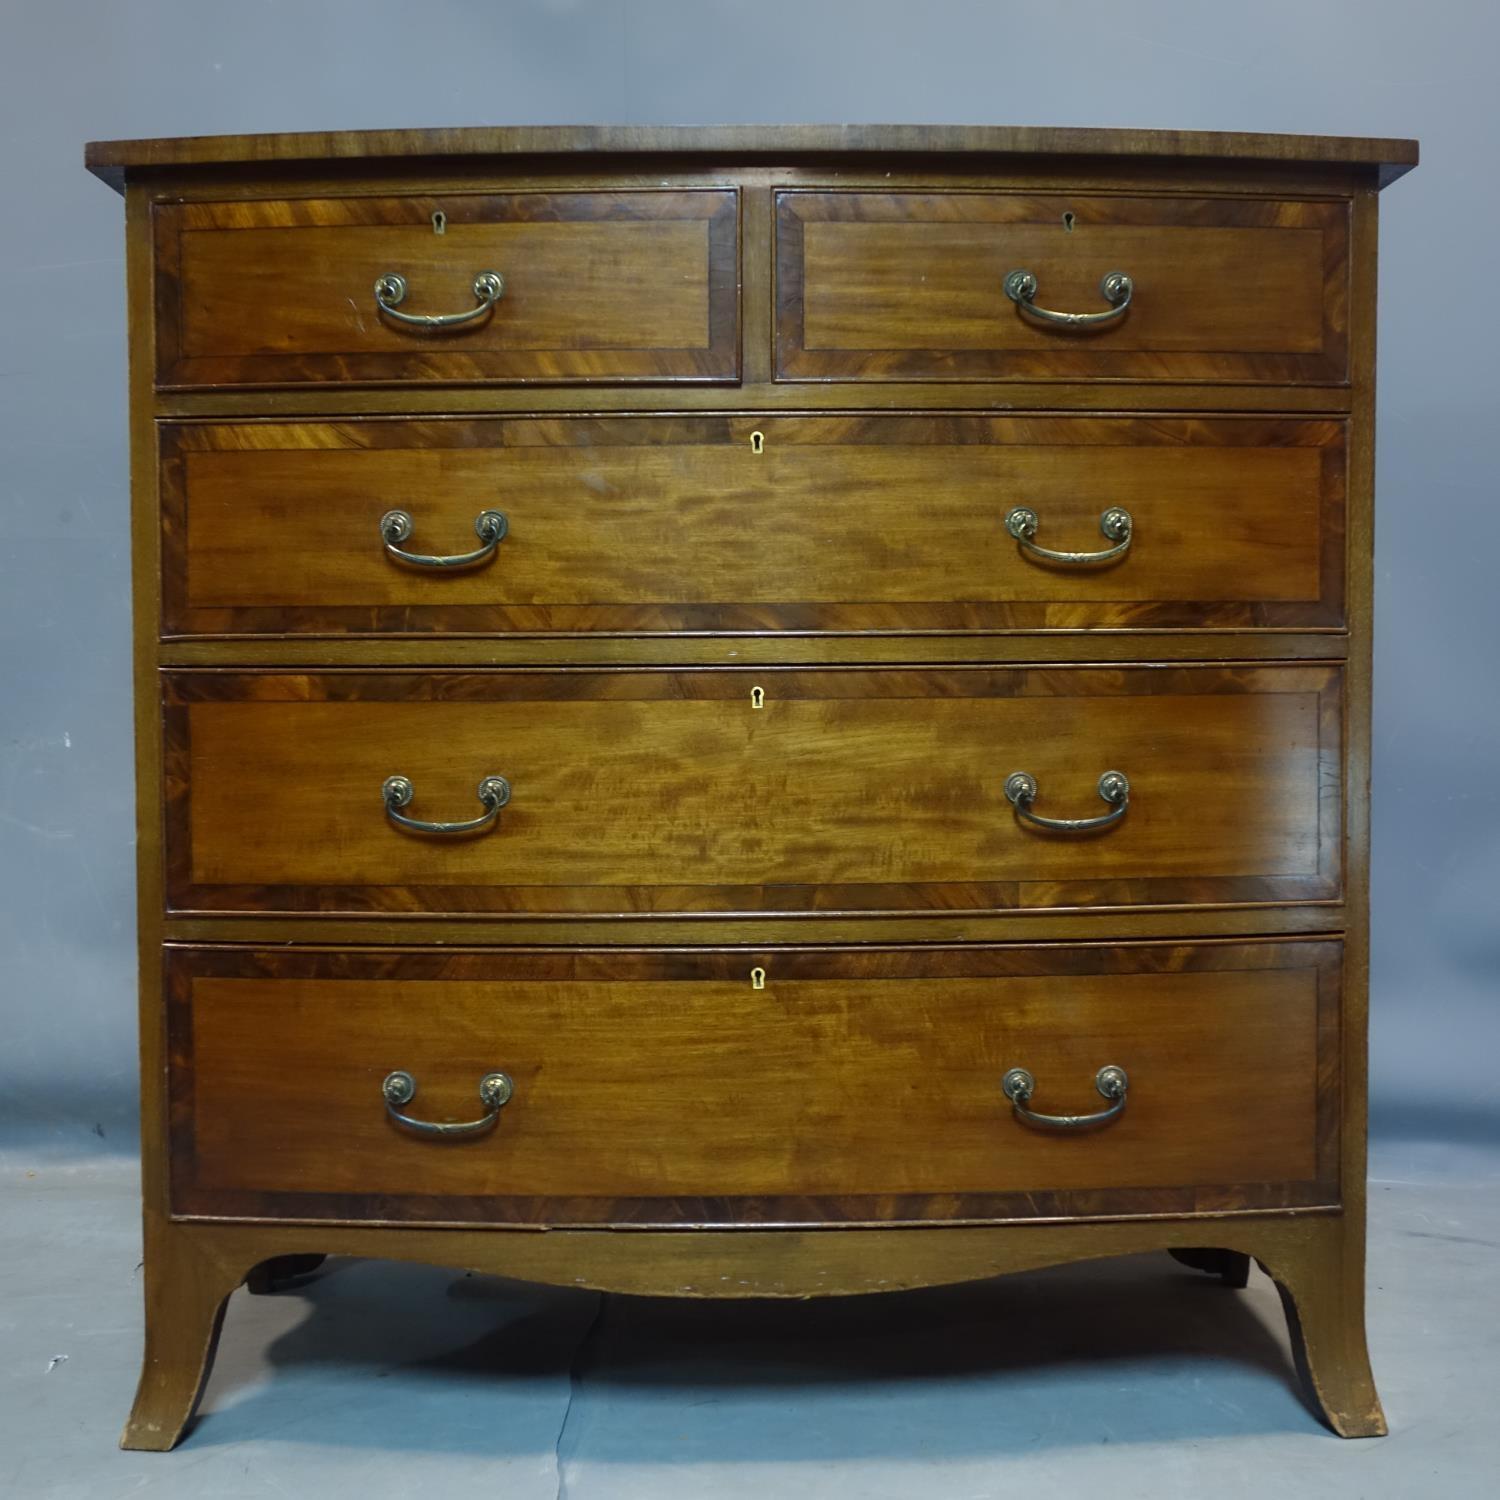 An early 19th century mahogany cross banded bow front chest of drawers, H.106 W.107 D.57cm